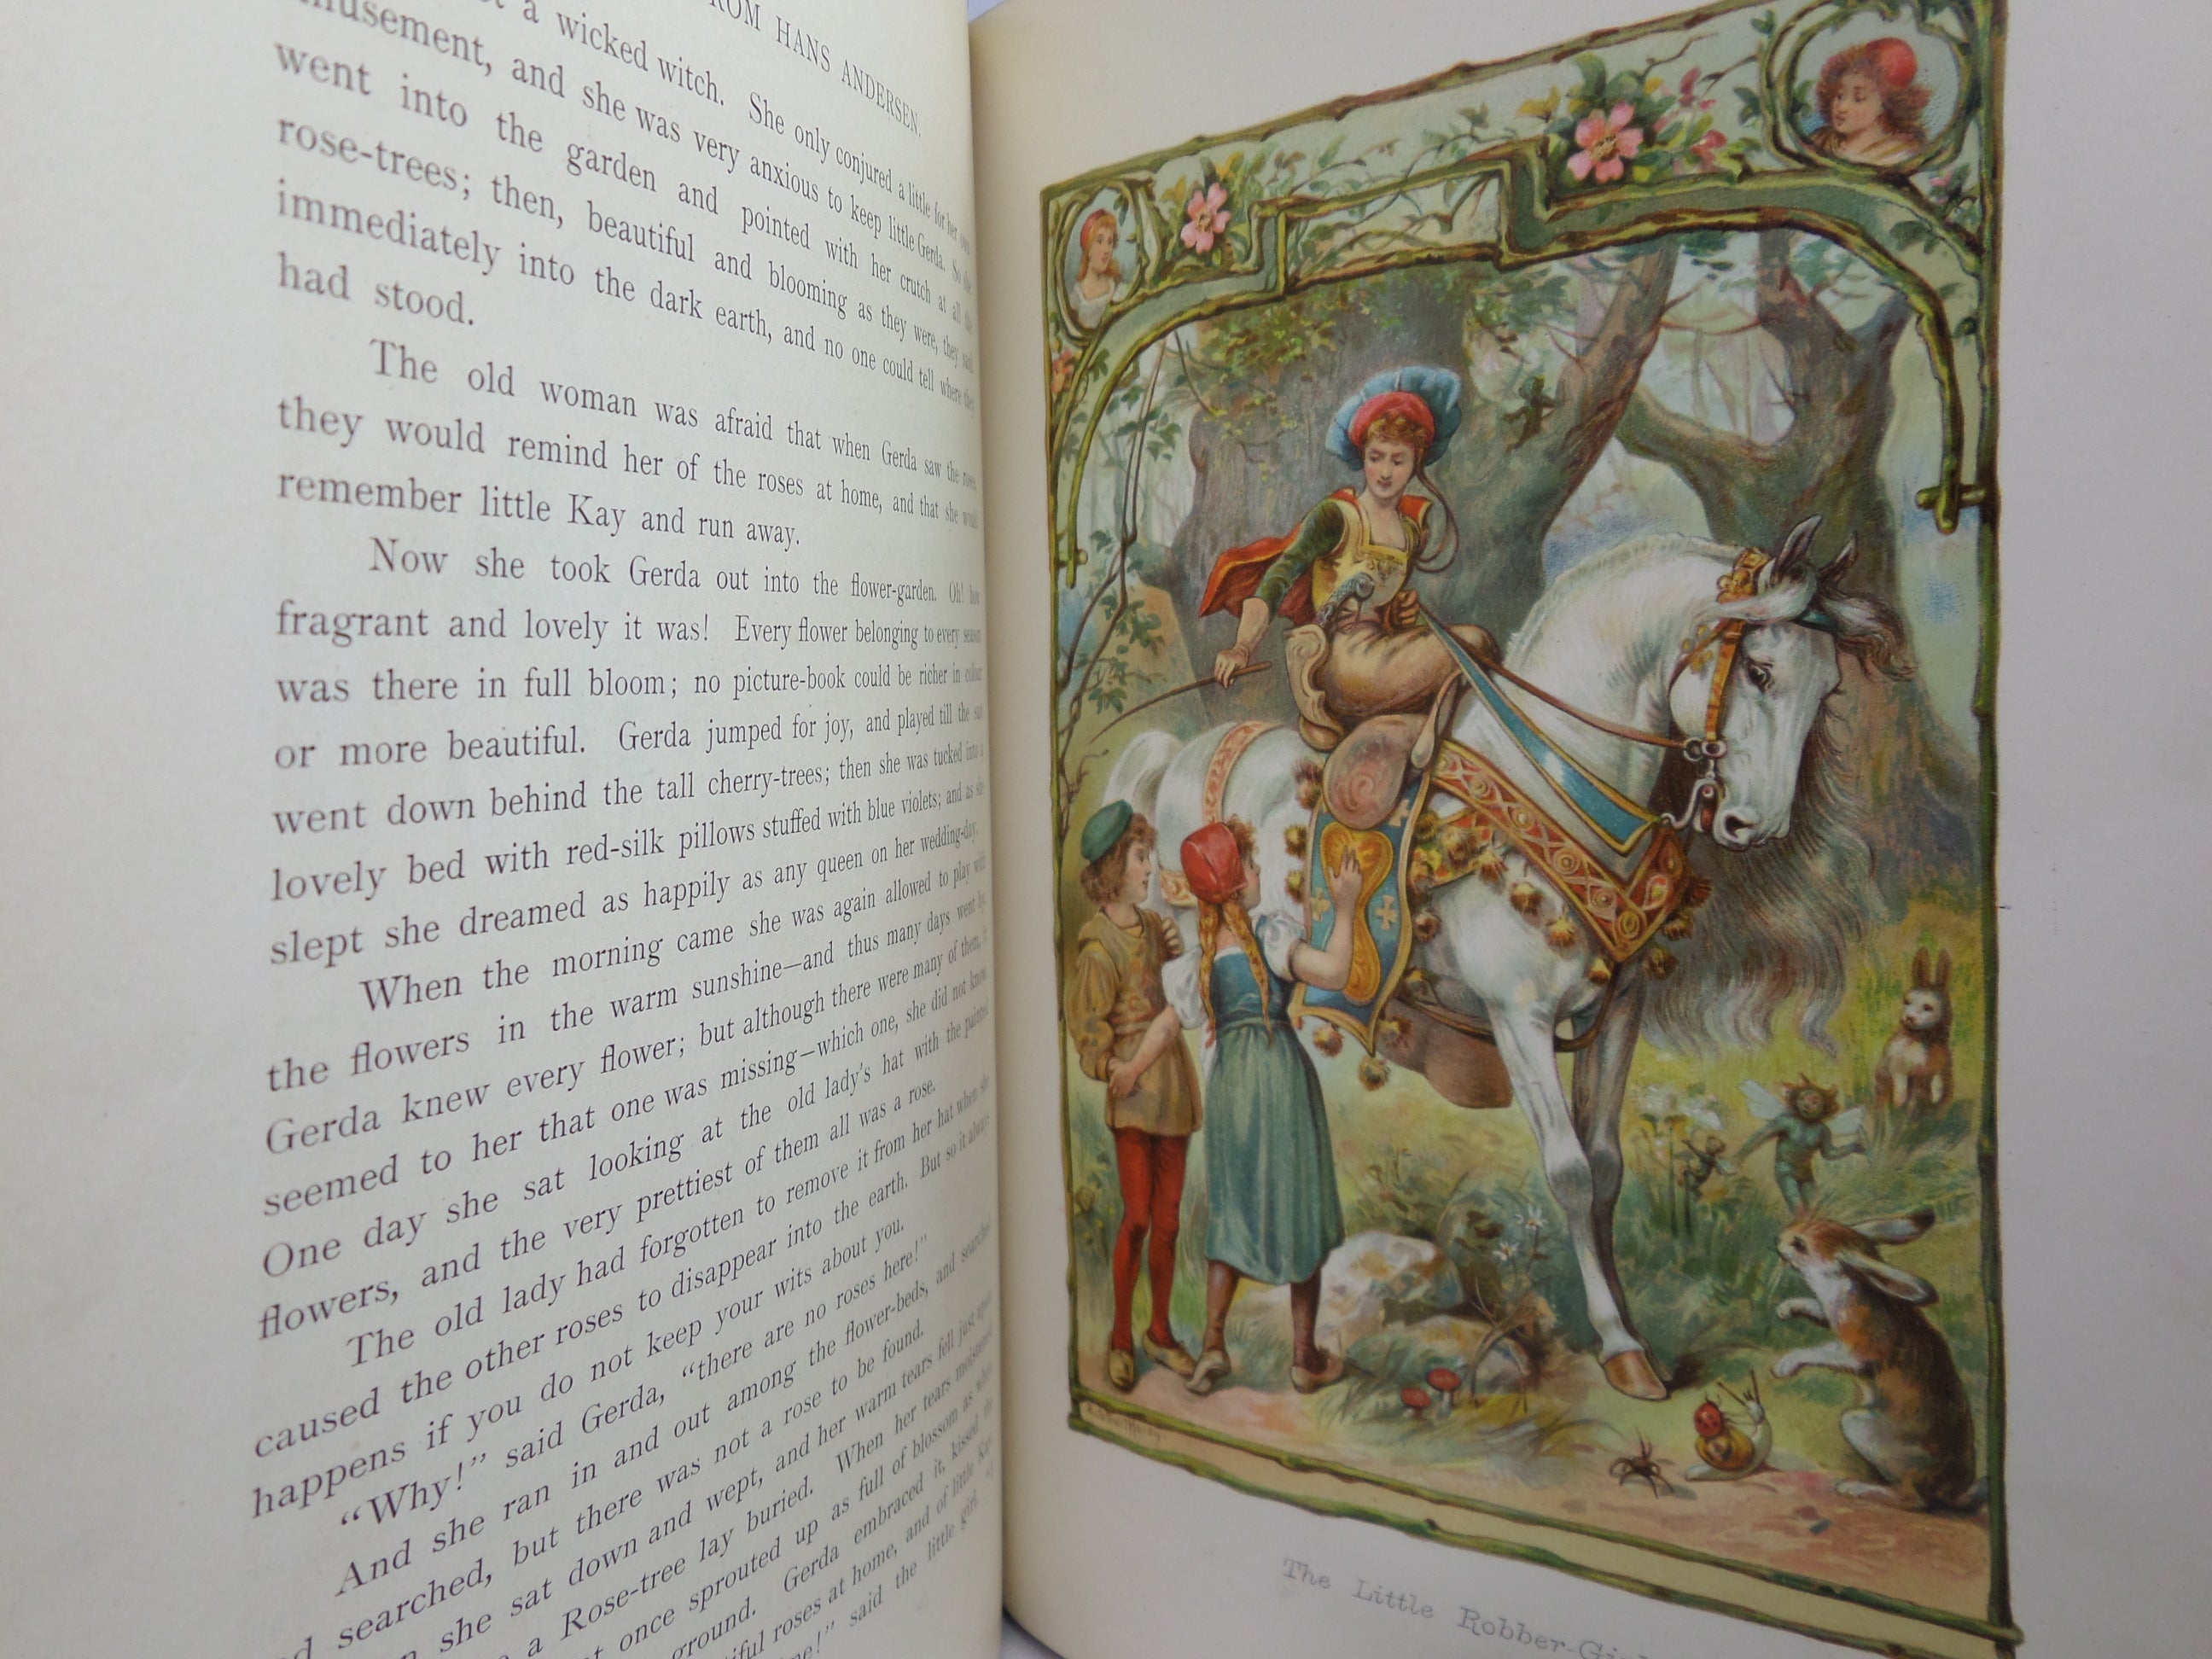 STORIES FROM HANS CHRISTIAN ANDERSEN 1897 ILLUSTRATED BY E.S. HARDY